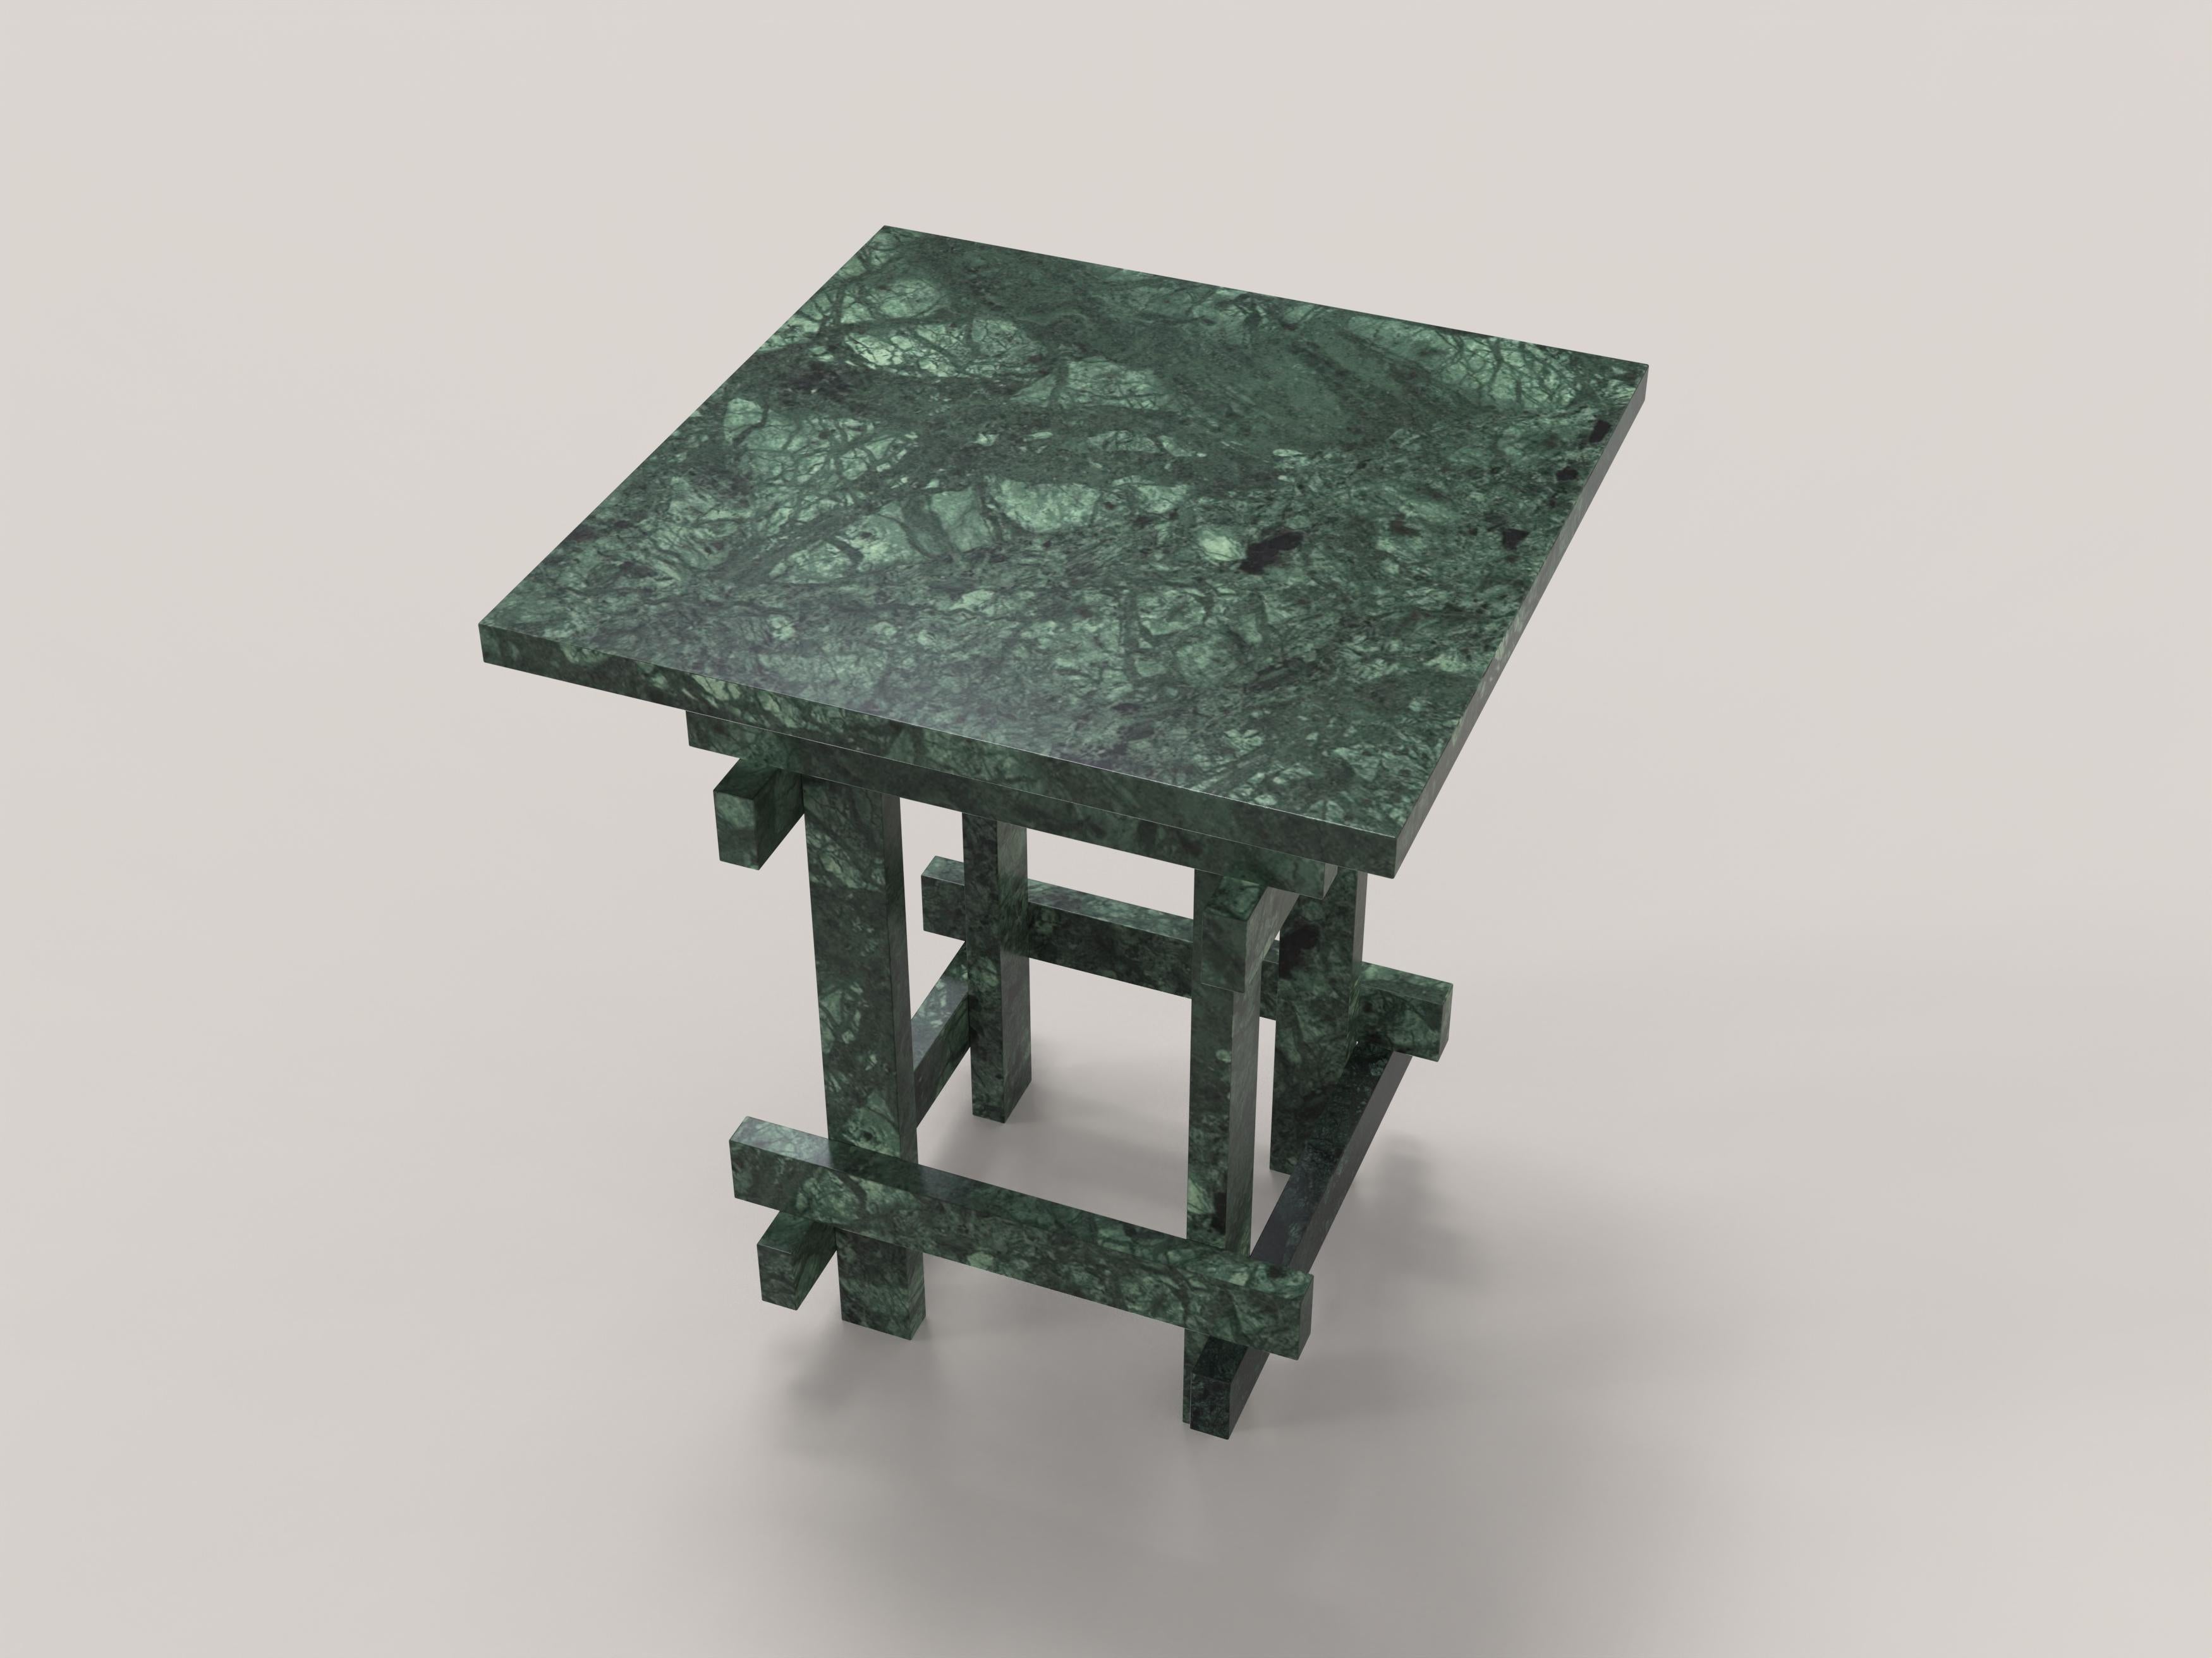 Contemporary LimitedEdition Green Marble Table, Paranoid V1 by Edizione Limitata For Sale 5